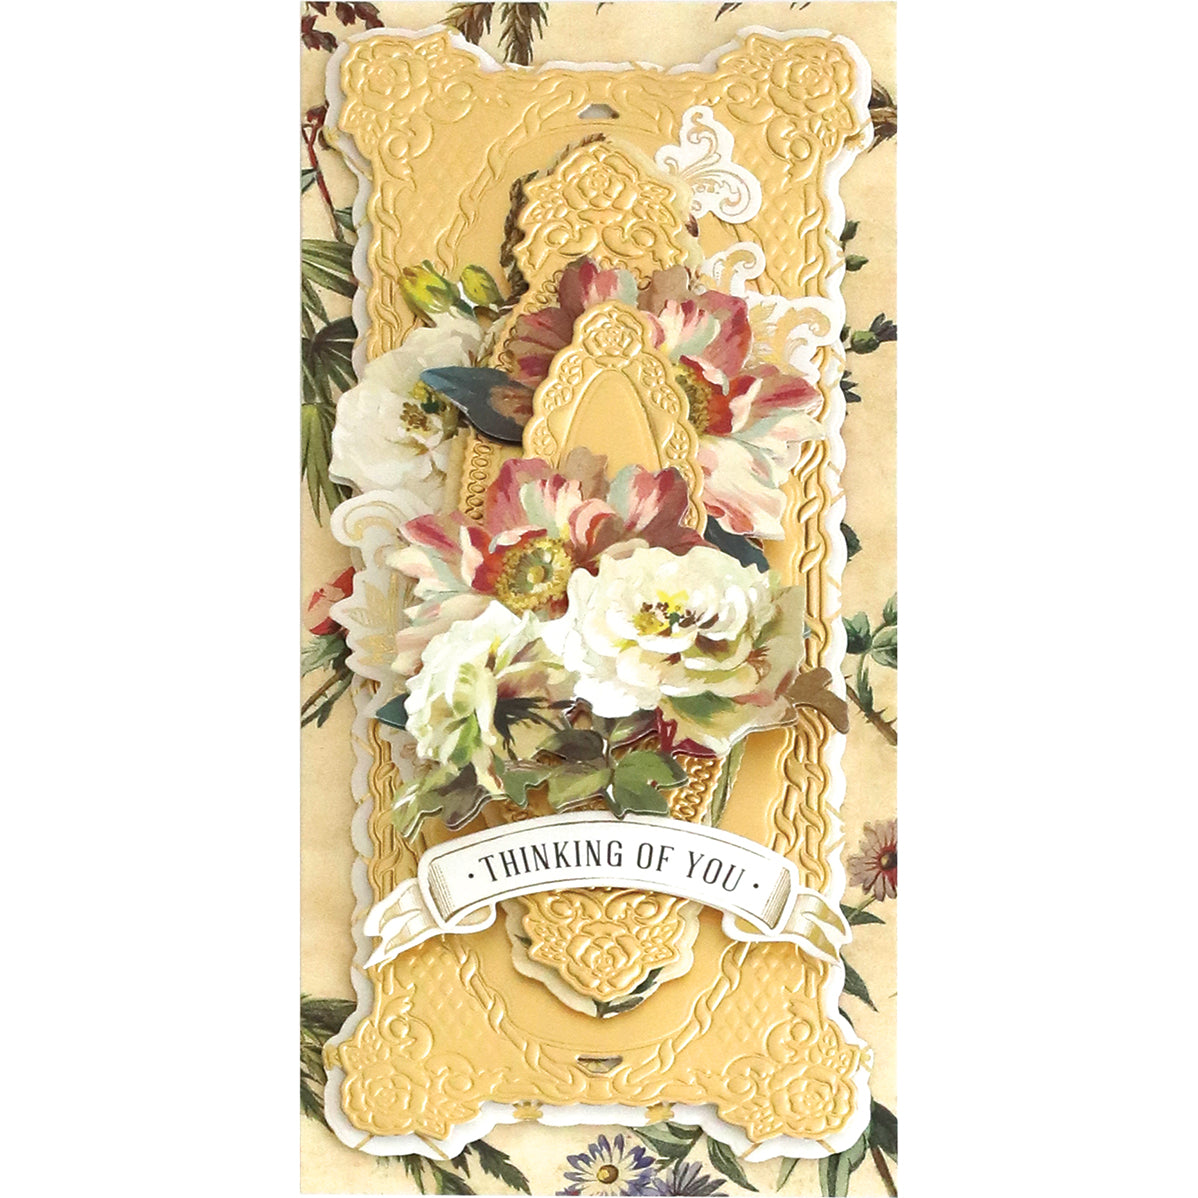 A beautiful floral card featuring the Anna Griffin 3D Rose Slimline Concentric Frame Dies and the heartfelt message "thinking of you." Perfect for card making enthusiasts.